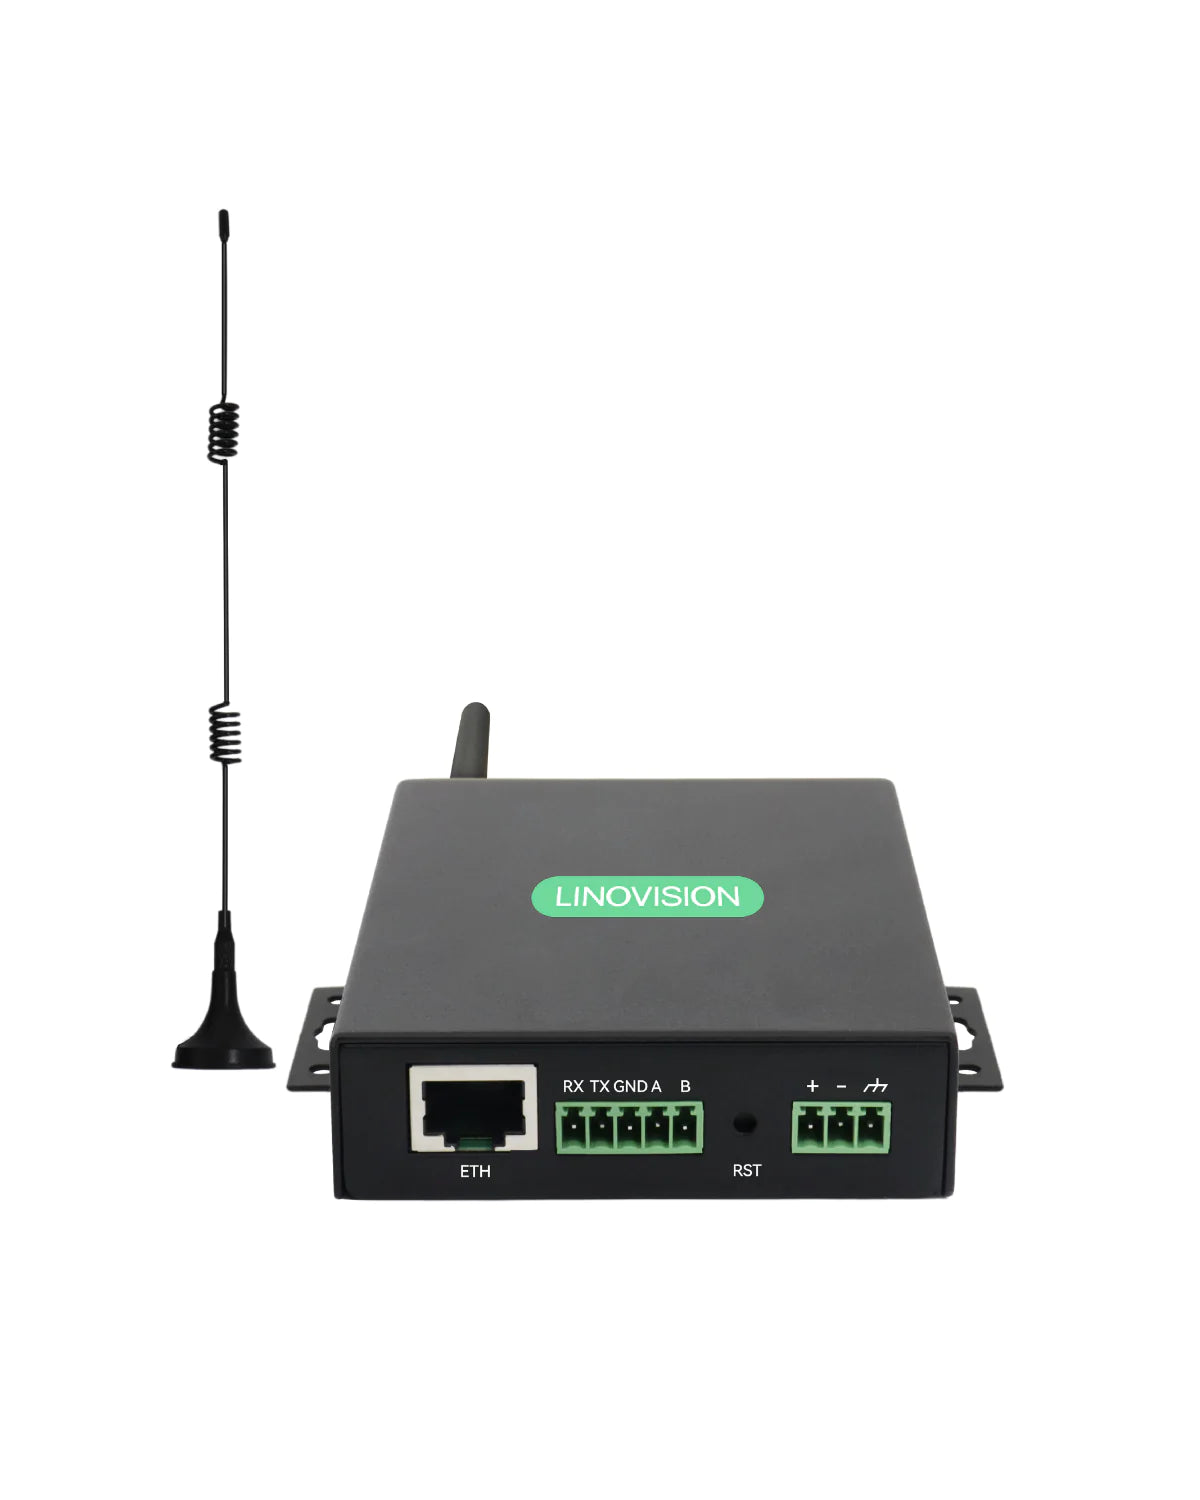 Industrial 4G LTE Cellular Router supports virtual SIM and